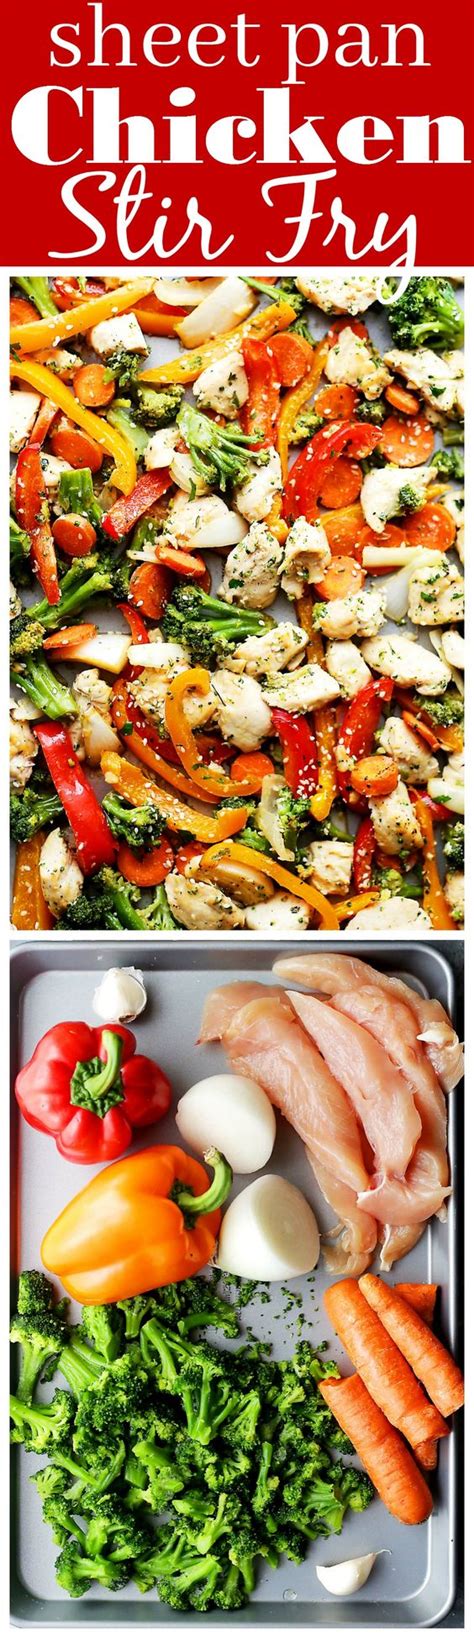 30 Minute Meals Recipes for Easy and Delicious Lunch and ...